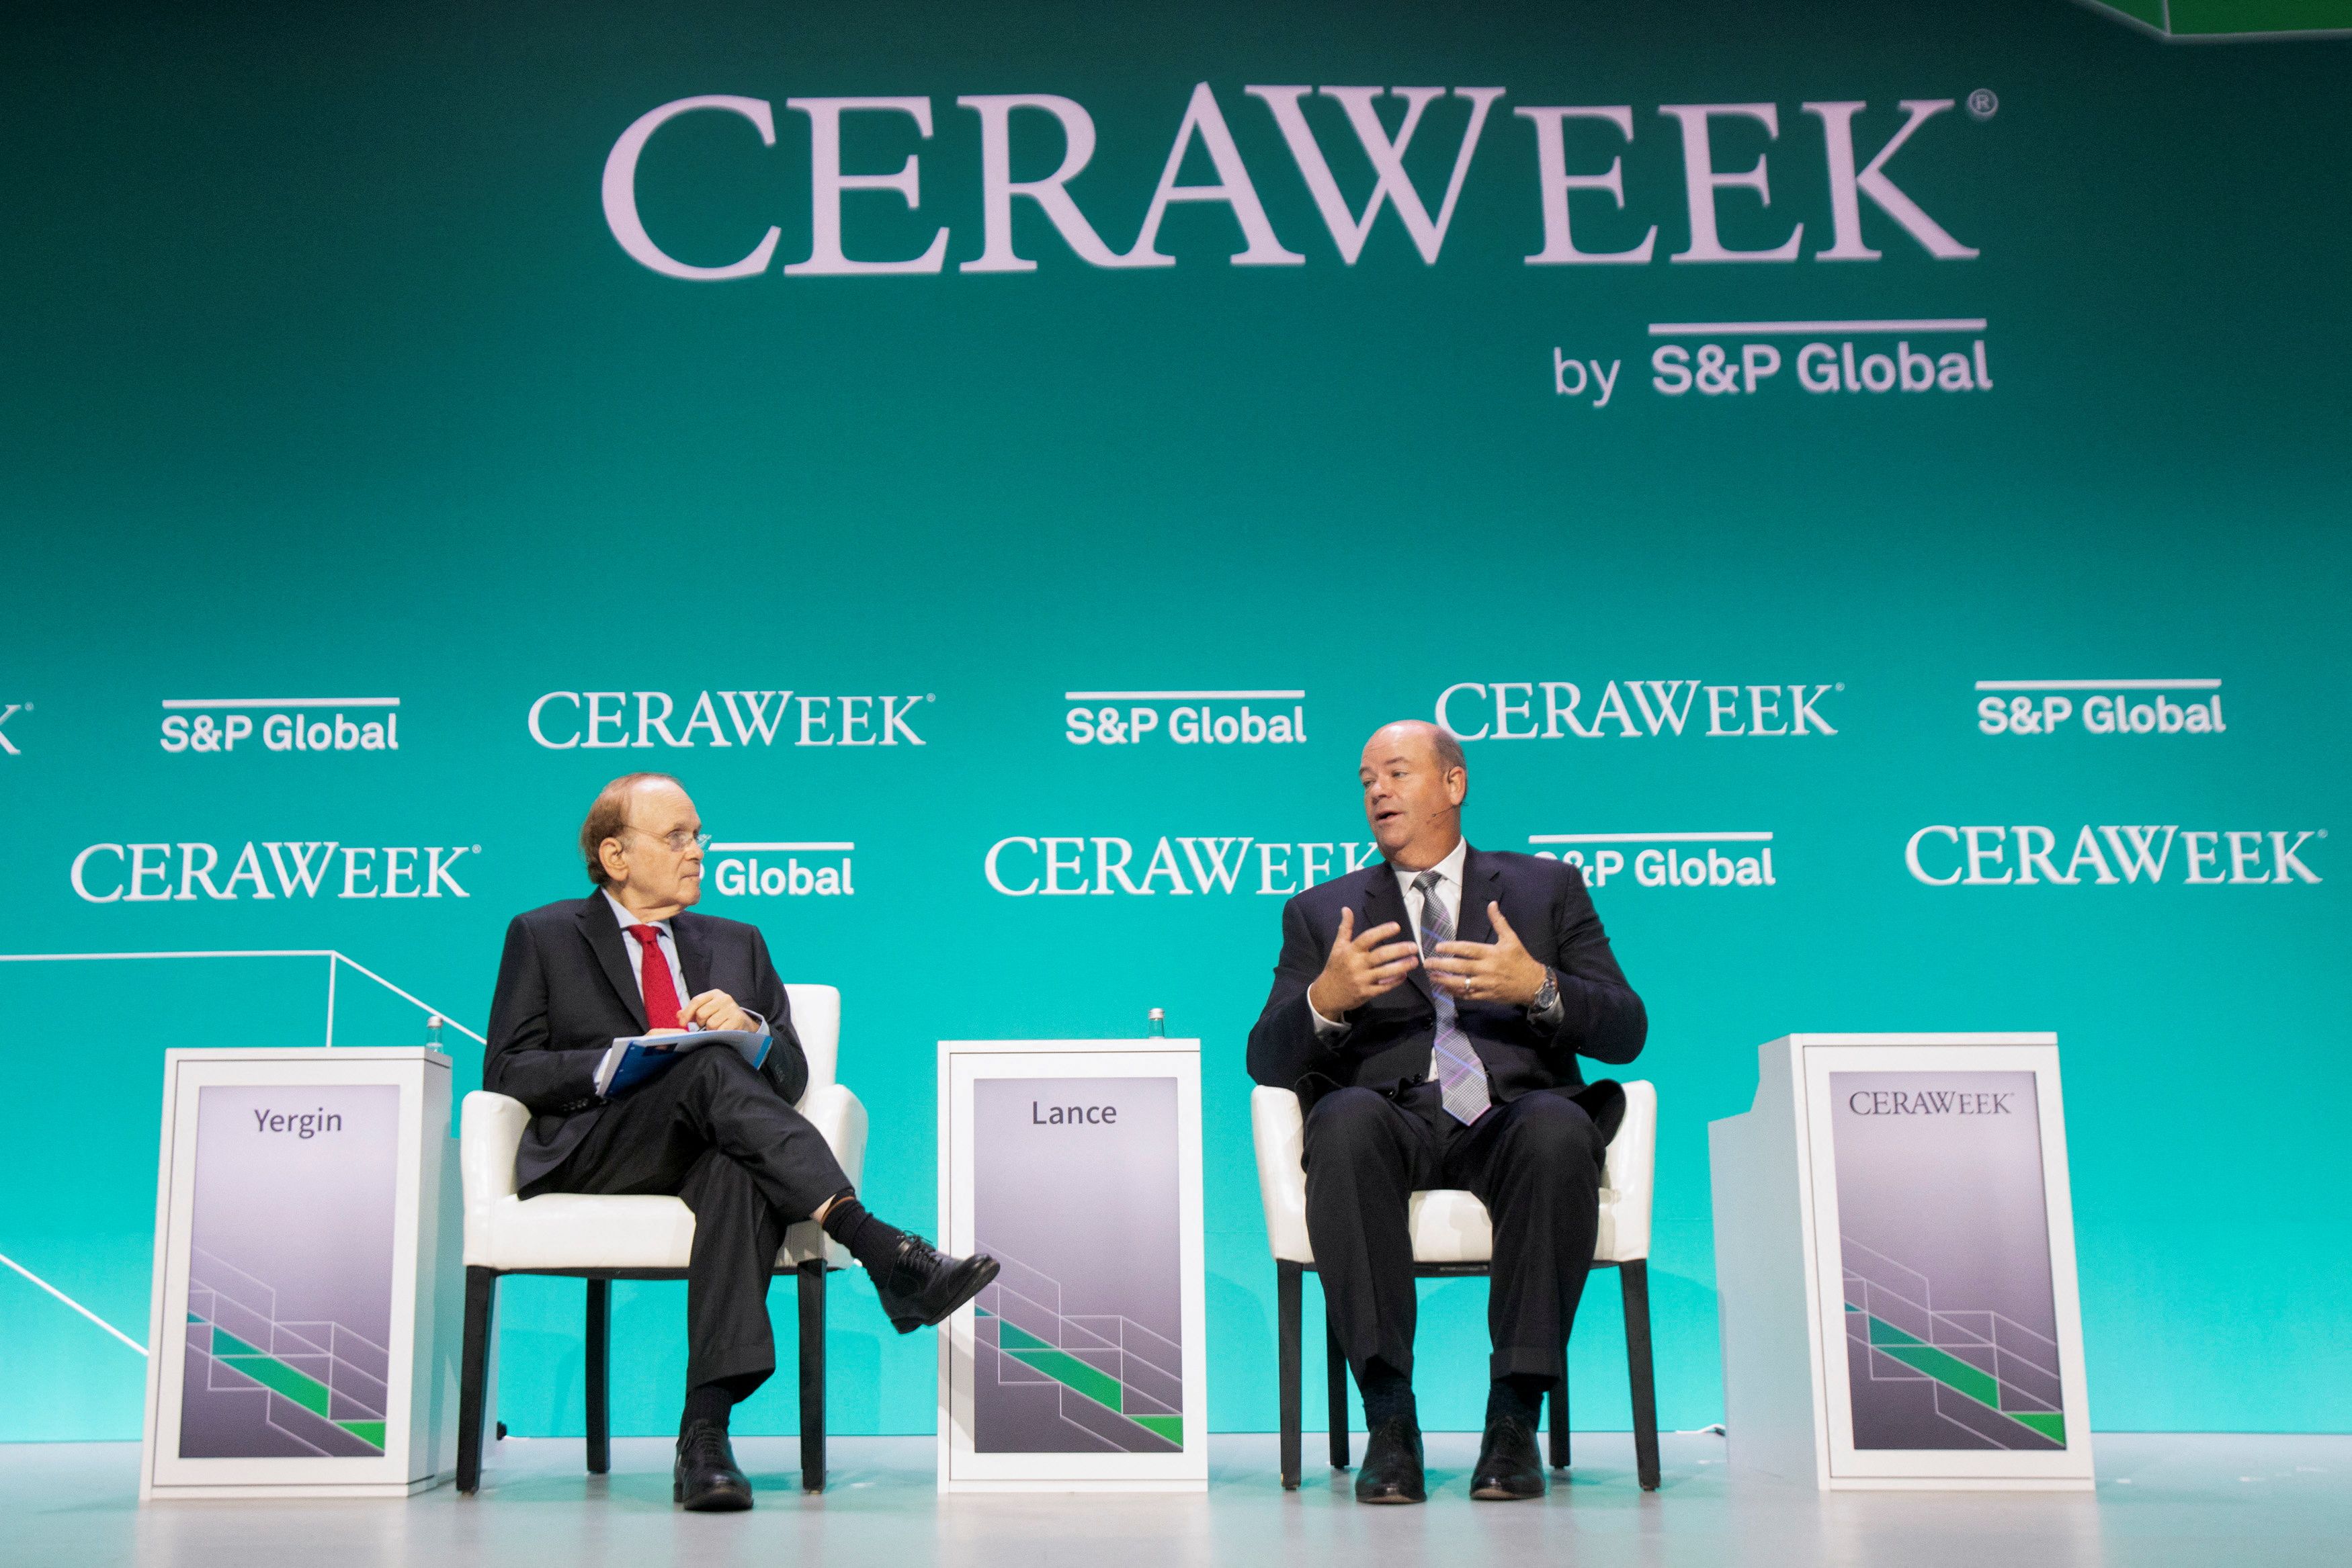 CERAWEEK With bans on Russian oil, energy execs tell governments Work